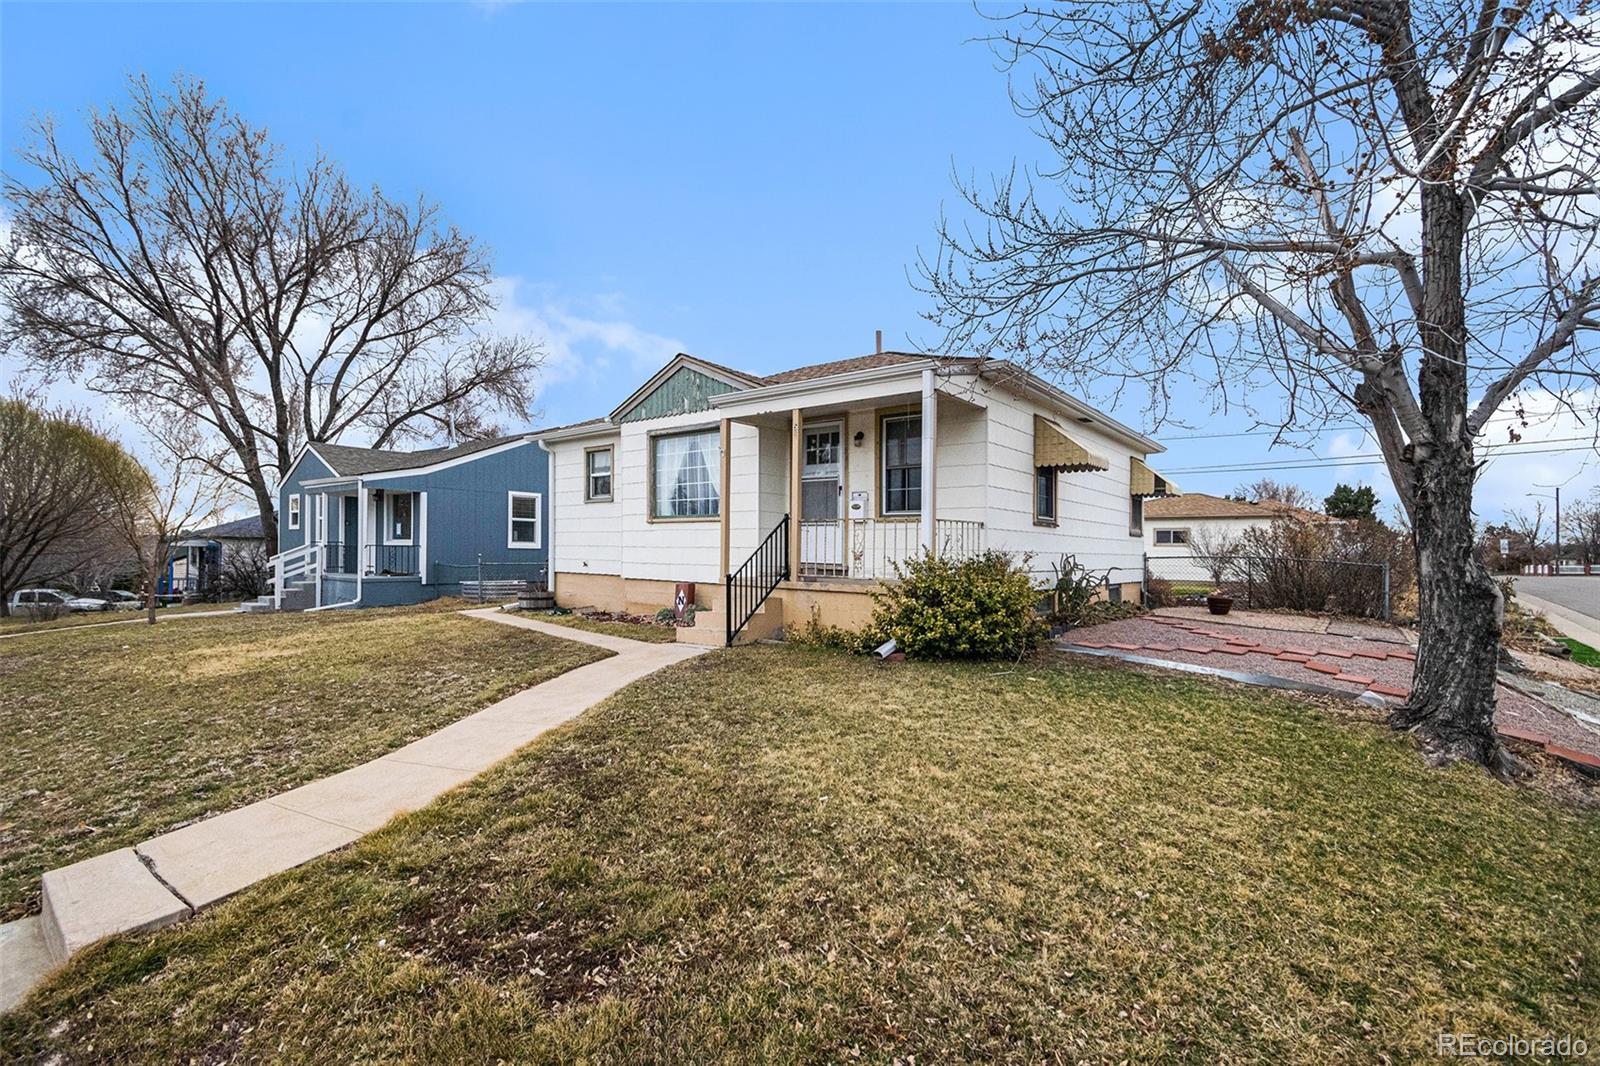 51 s canosa way, Denver sold home. Closed on 2024-04-26 for $455,000.